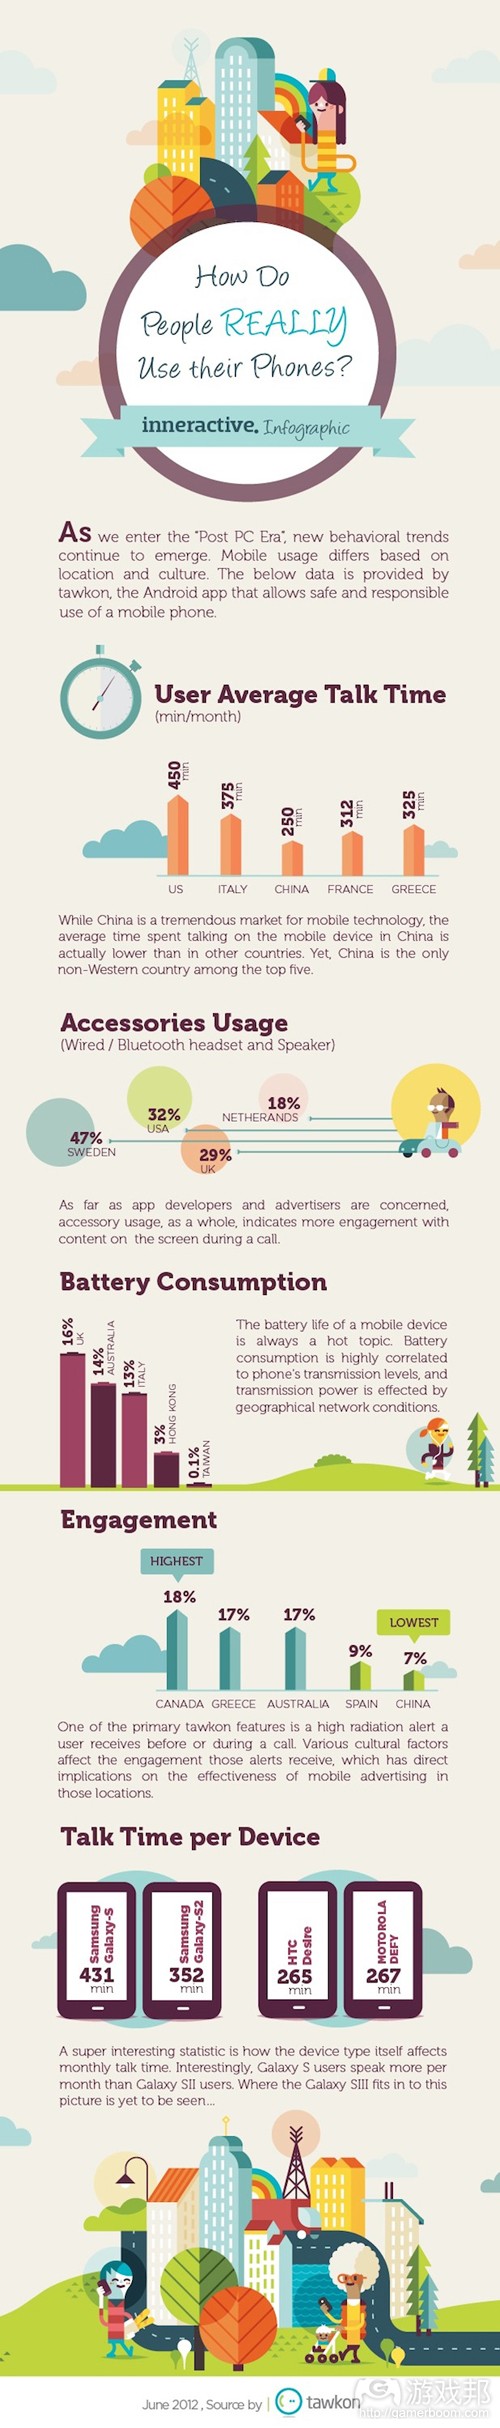 android_use_infographic（from tawkon）